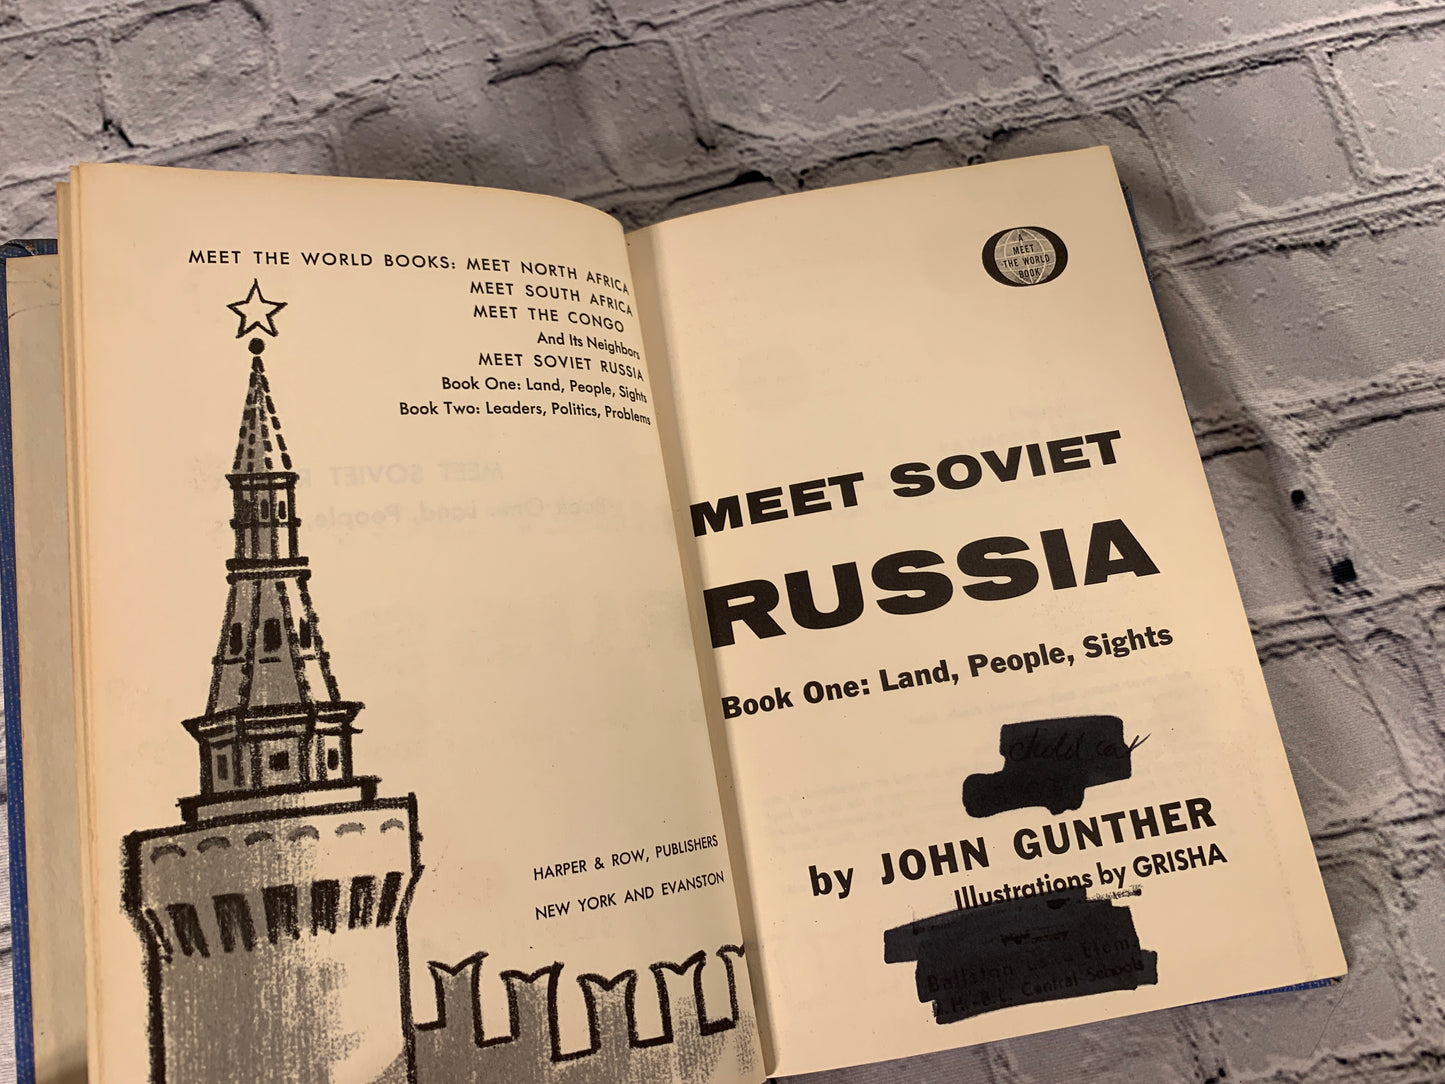 Meet Soviet Russia - Book One: Land, People, Sights by John Gunther [1962]